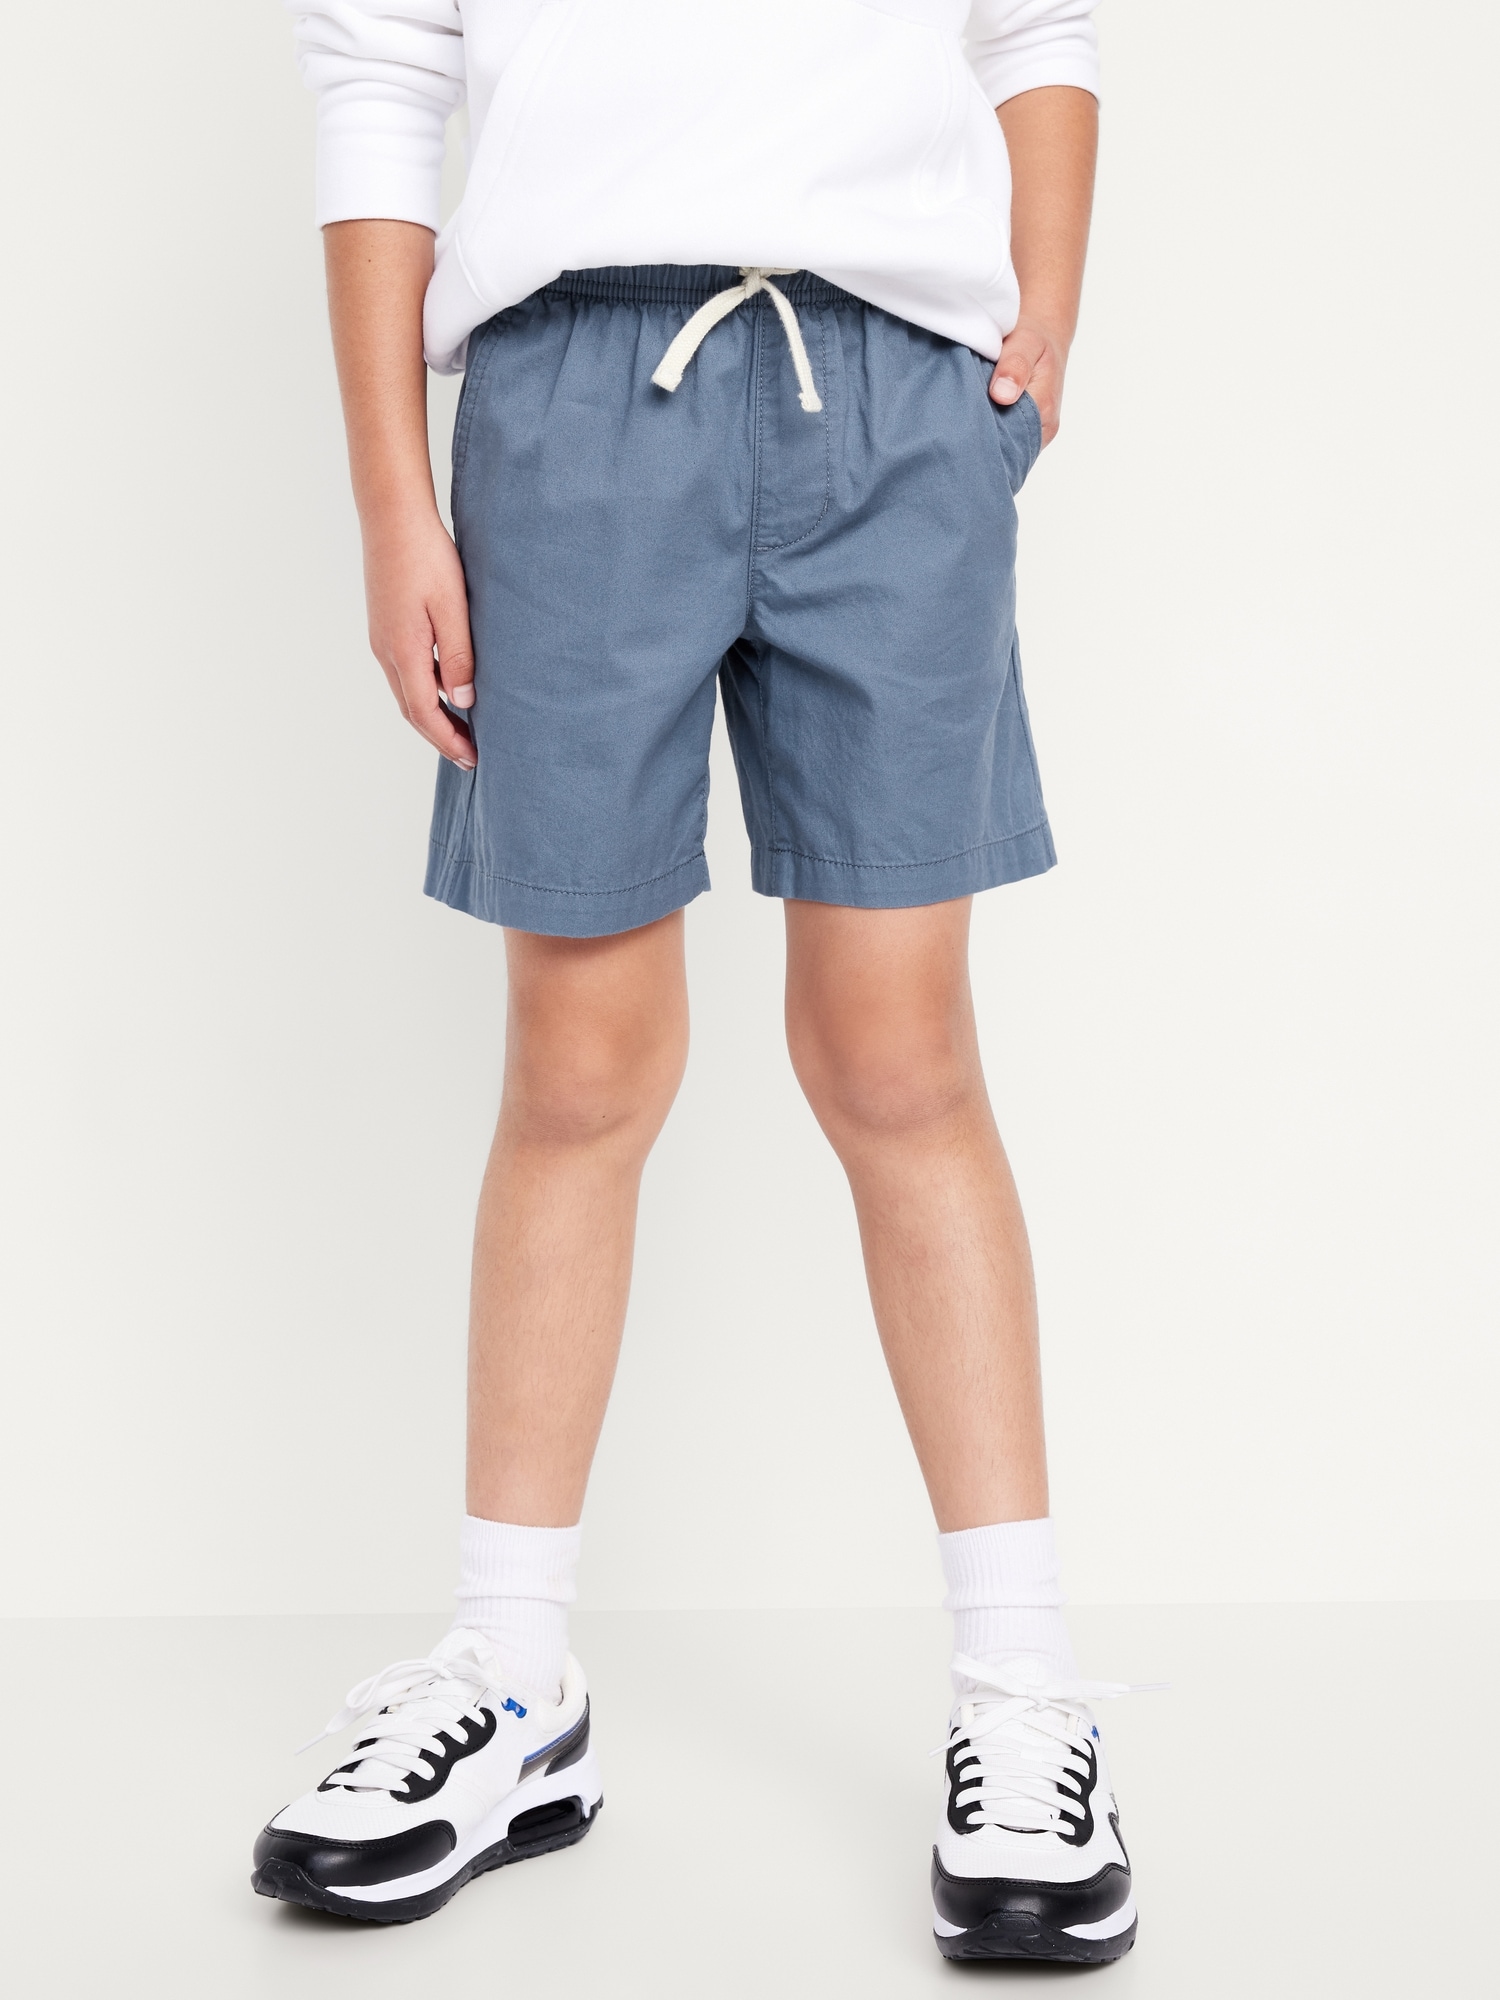 Old Navy Built-In Flex Twill Straight Uniform Shorts for Boys Size